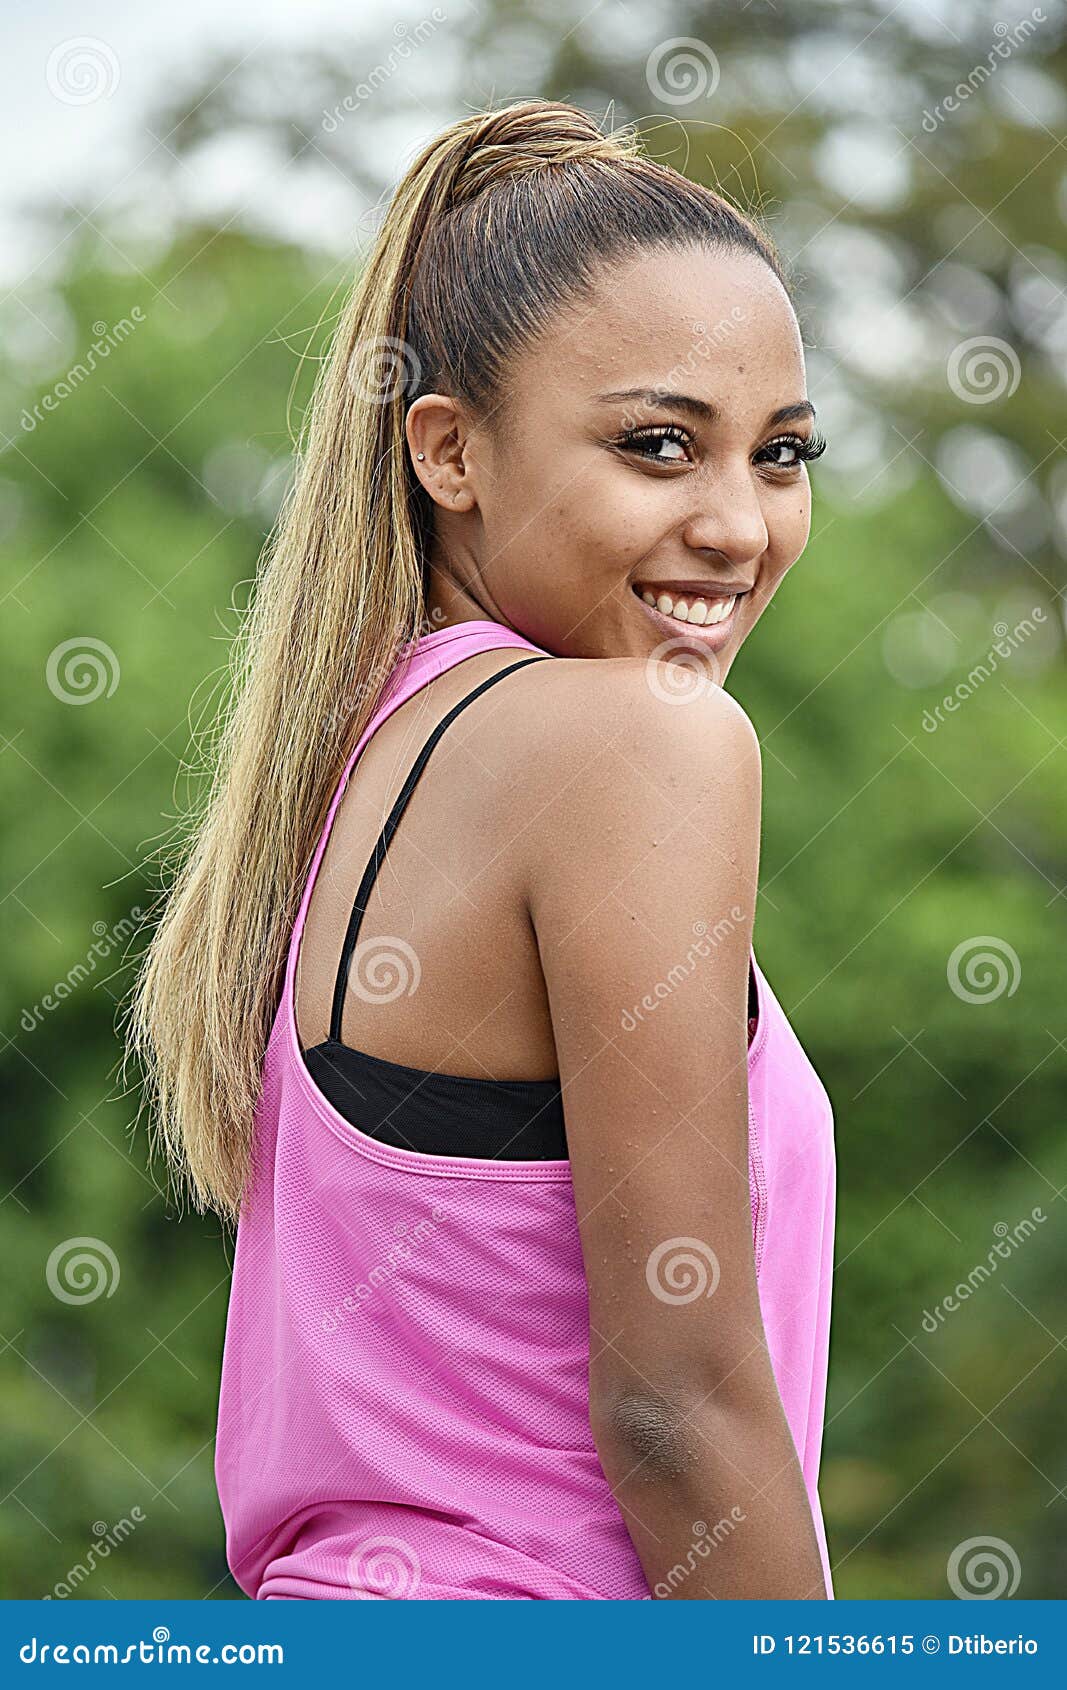 young cute sporty teen free xxx photo